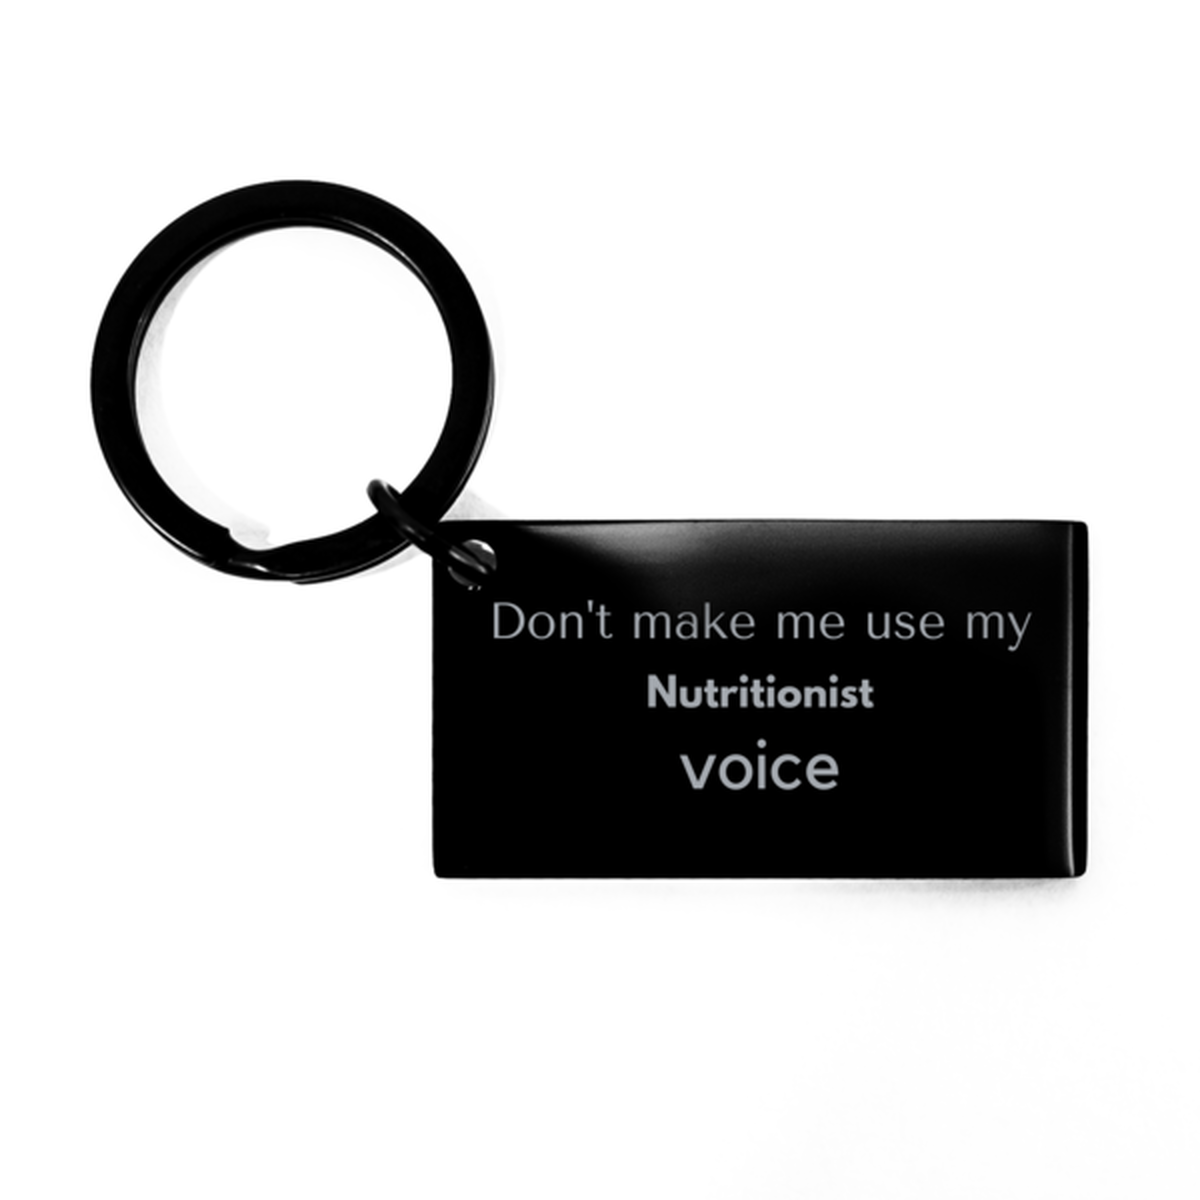 Don't make me use my Nutritionist voice, Sarcasm Nutritionist Gifts, Christmas Nutritionist Keychain Birthday Unique Gifts For Nutritionist Coworkers, Men, Women, Colleague, Friends